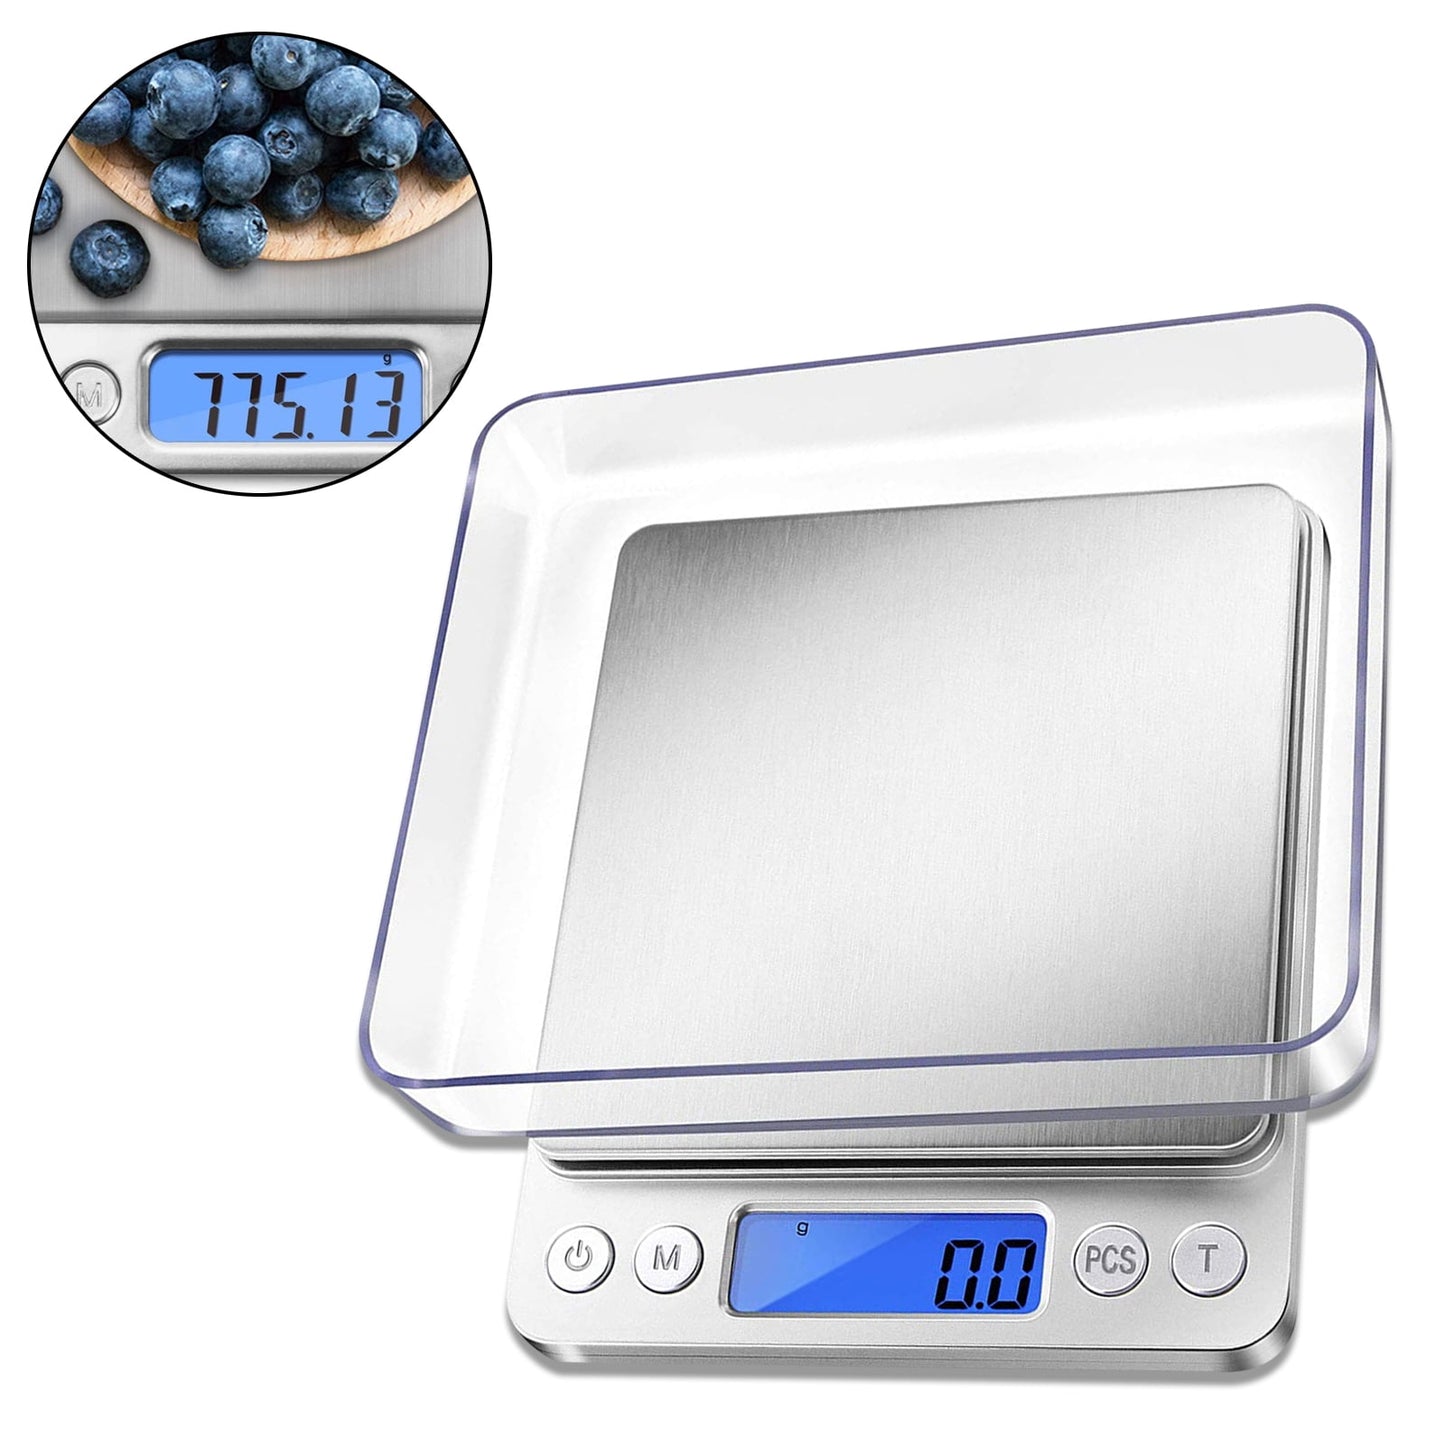 Digital Gram Scale 1kg 0.01g Food Scale, High Accuracy Kitchen Scale, Multifunctional Stainless Steel Mini Pocket Scale with LCD Display Tare Features, Silver